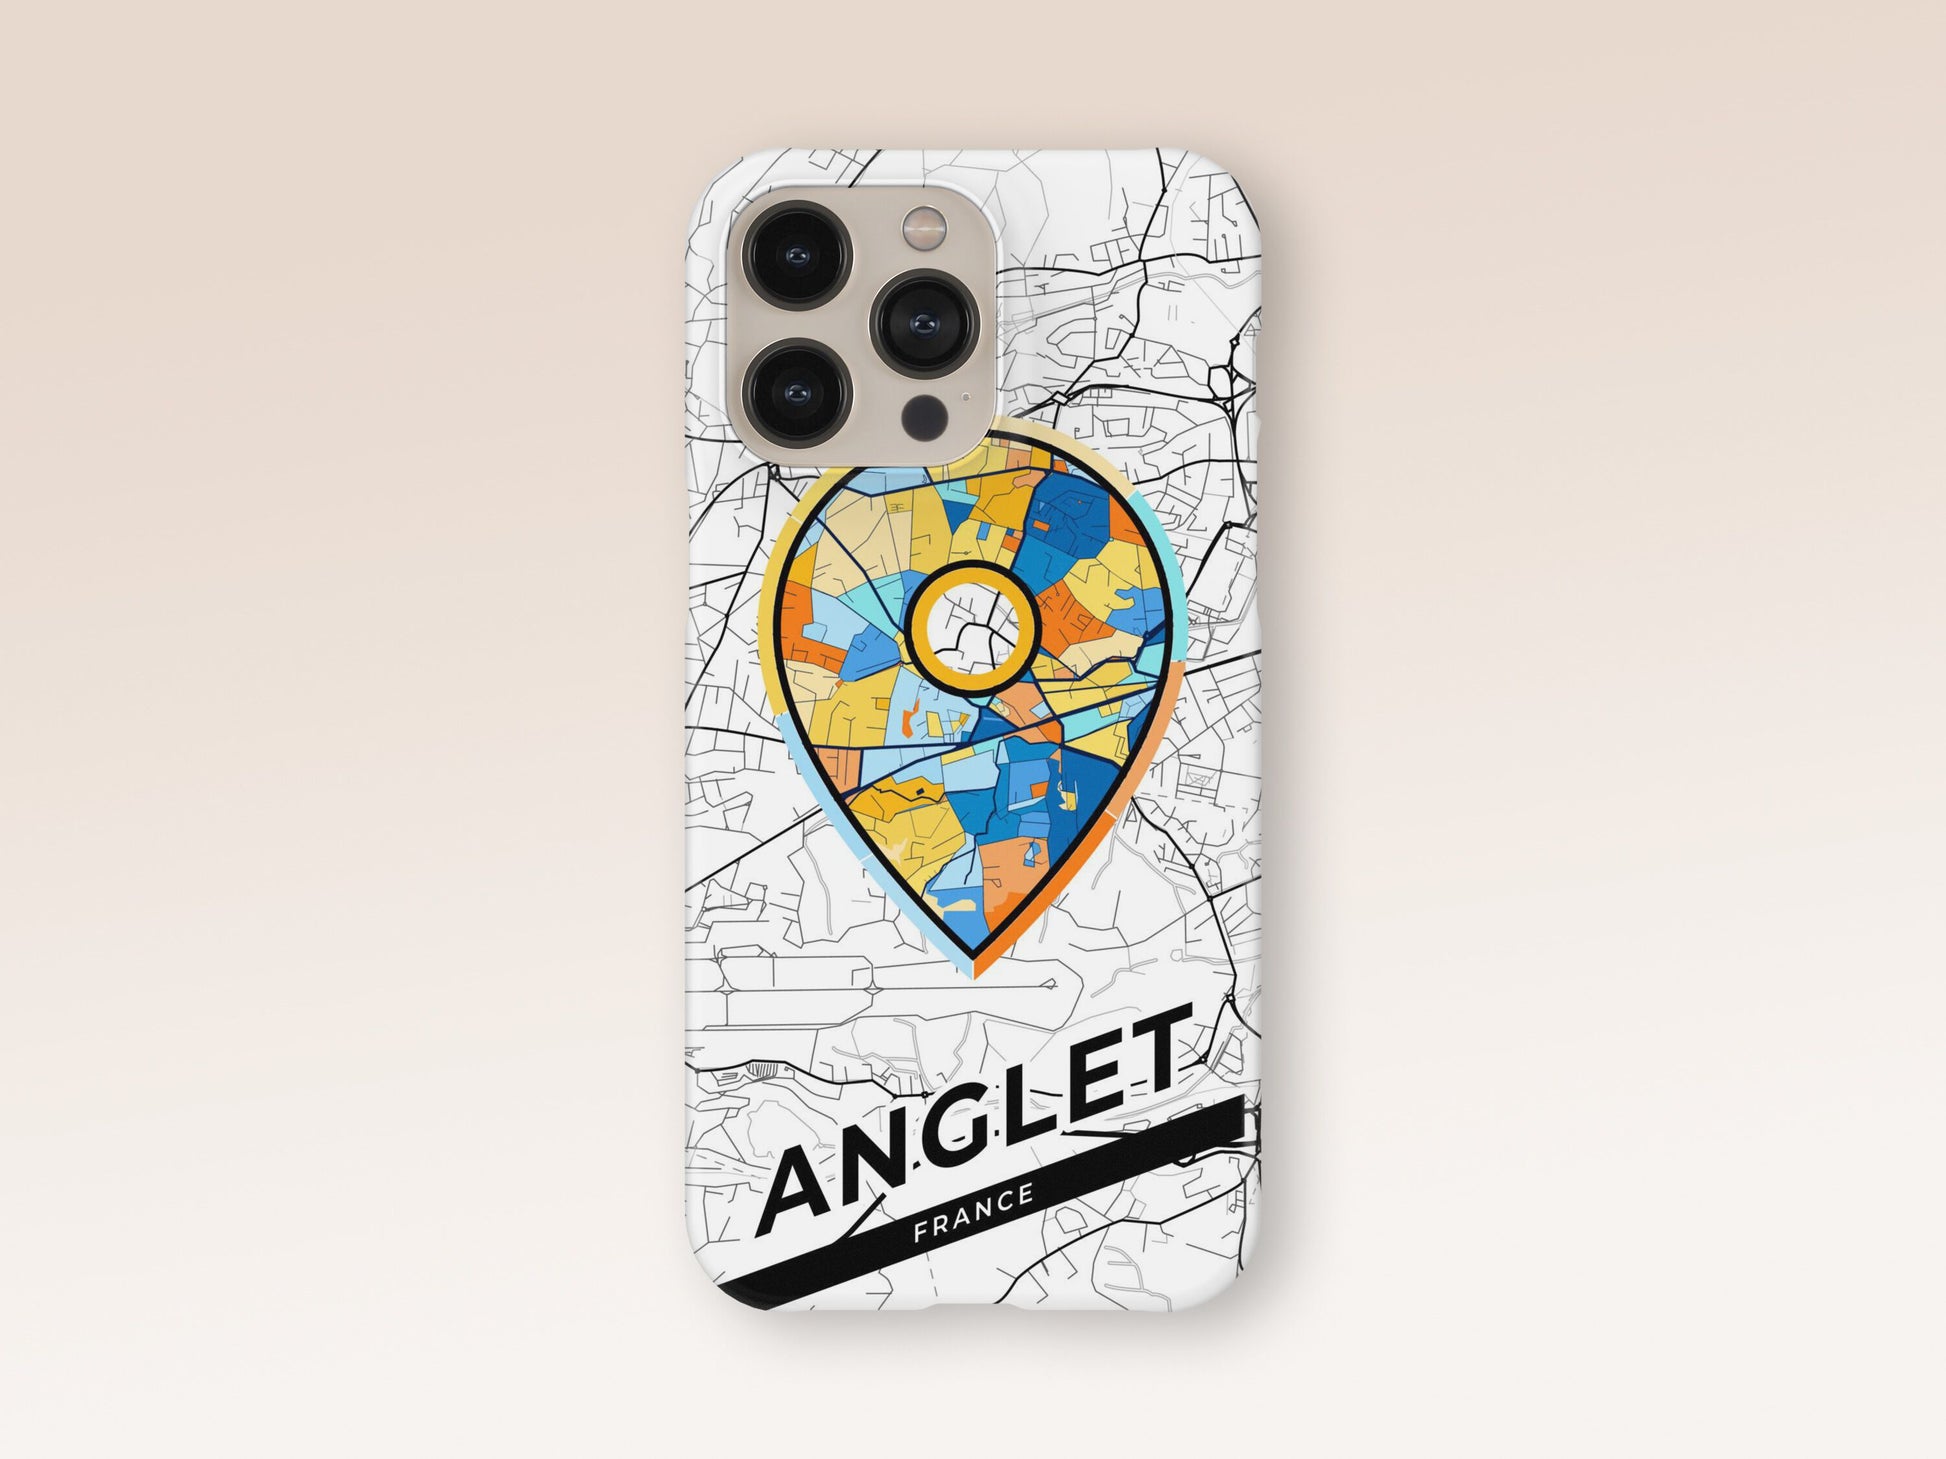 Anglet France slim phone case with colorful icon. Birthday, wedding or housewarming gift. Couple match cases. 1